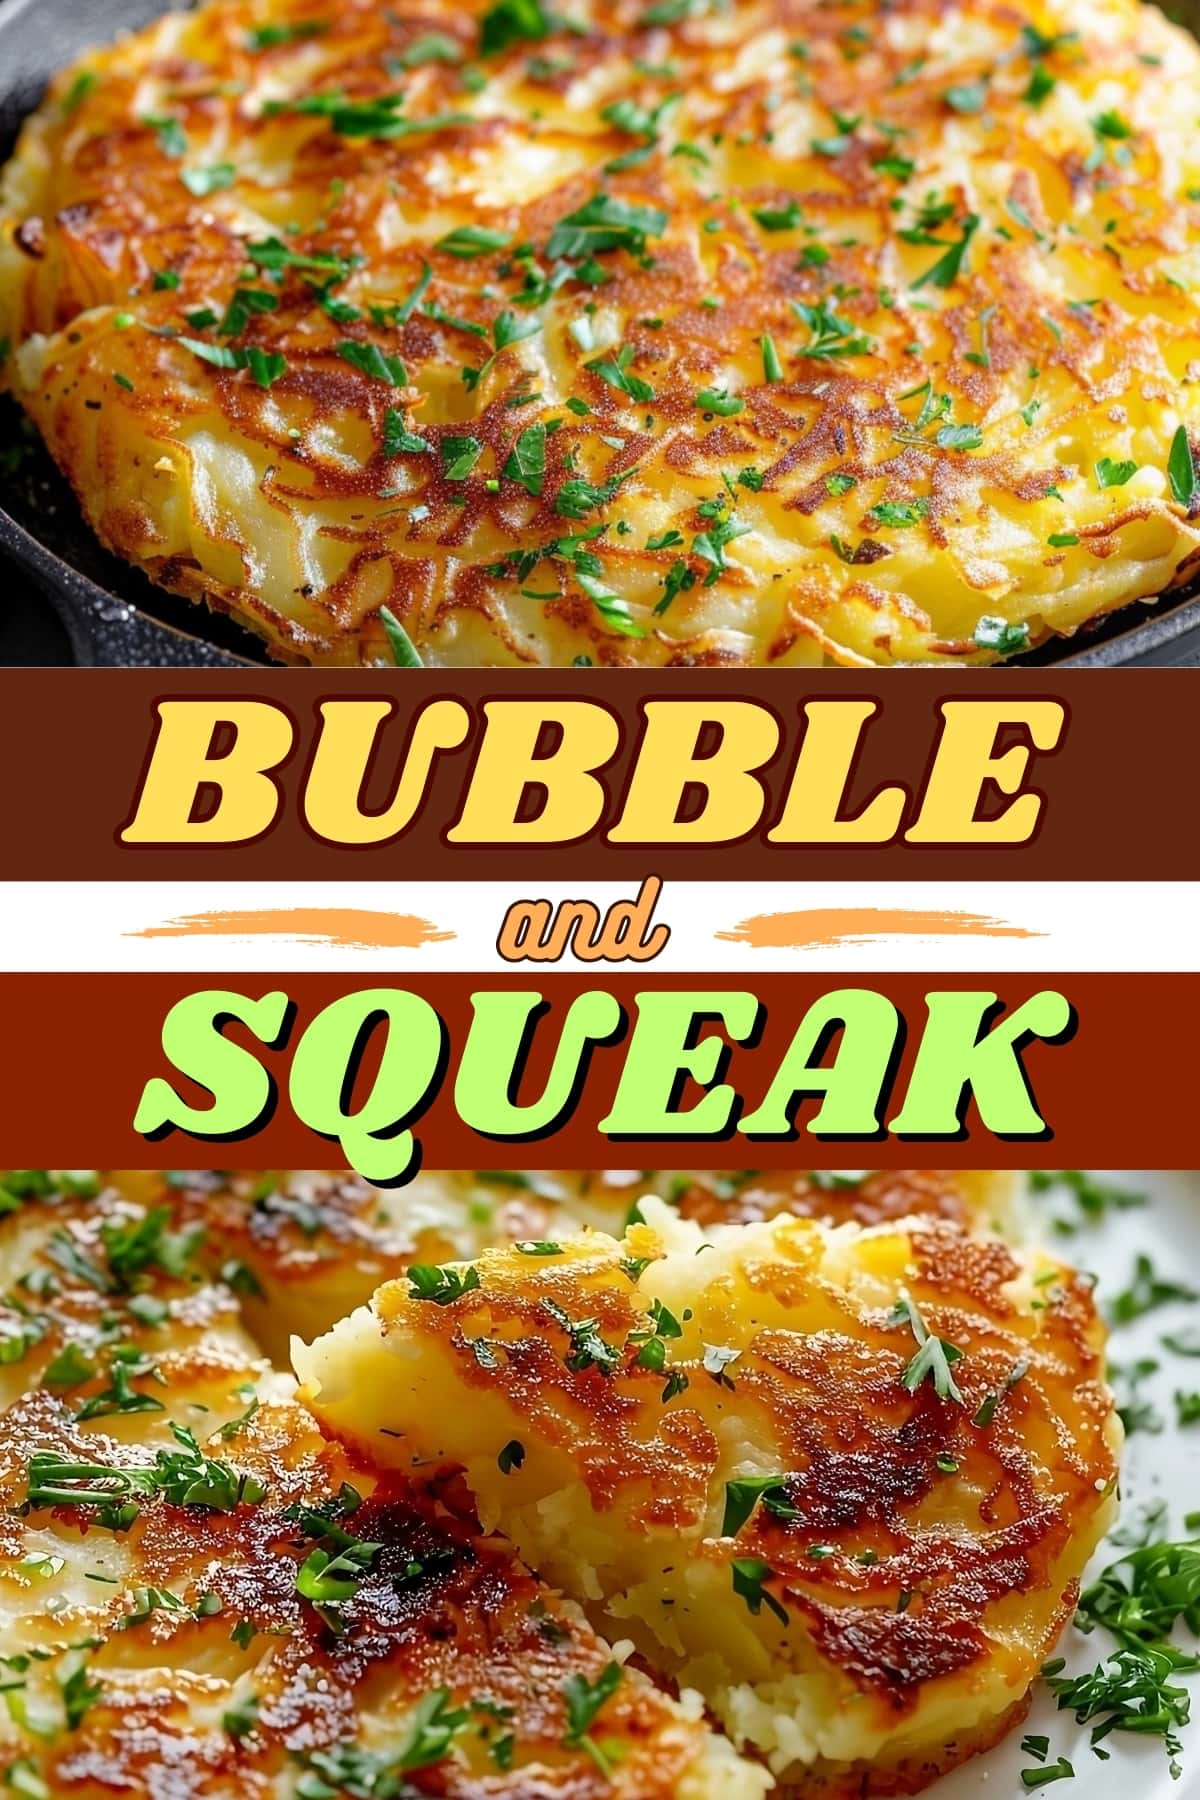 Bubble and squeak. 